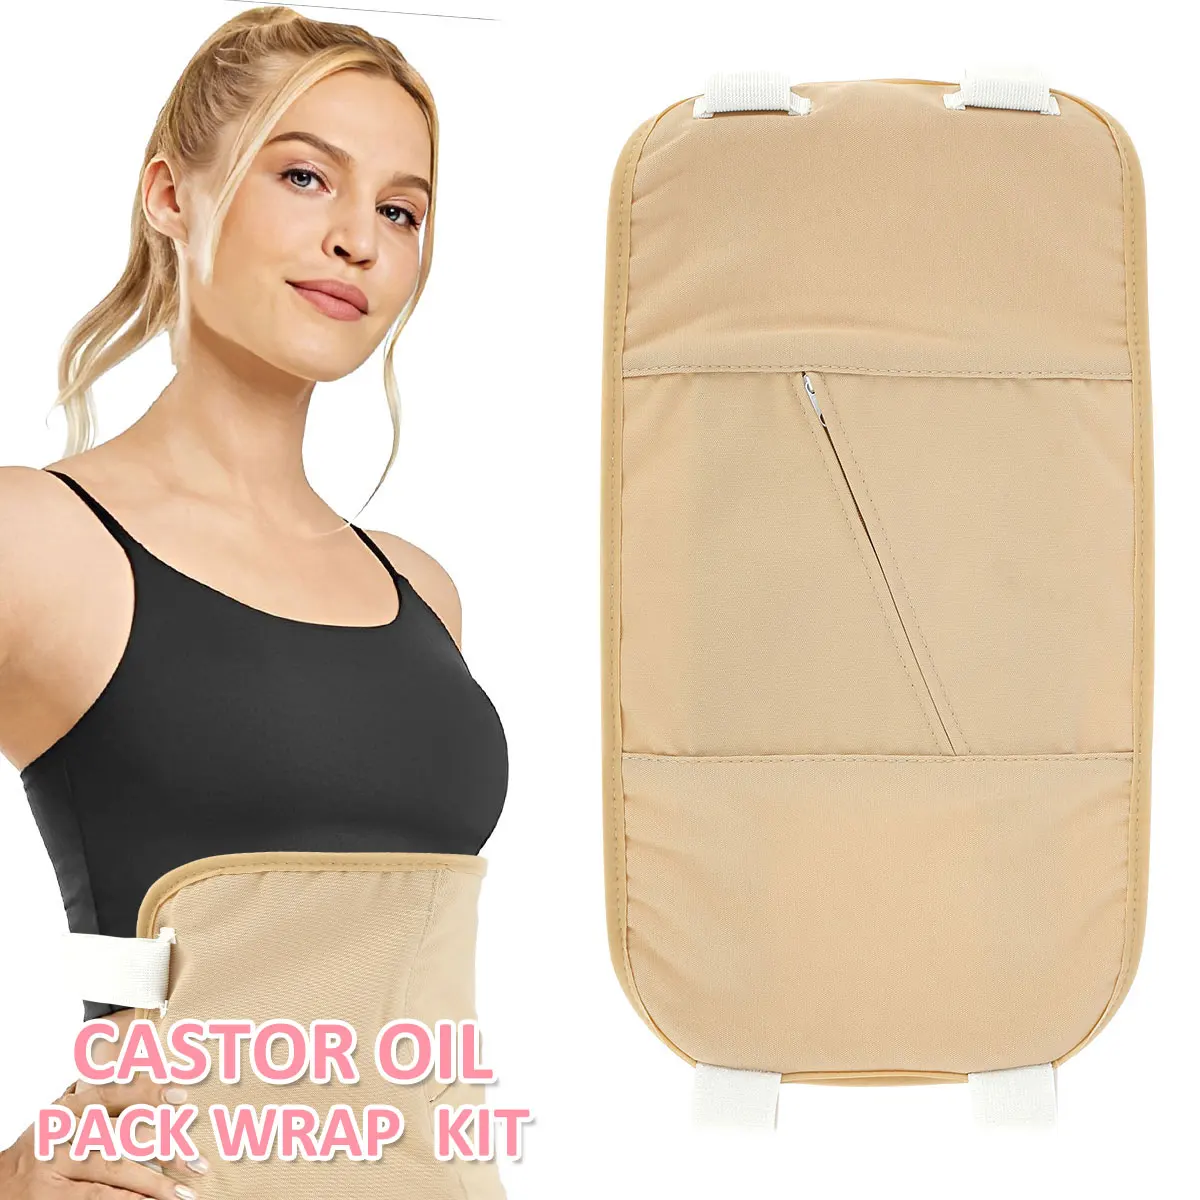 

Essential Oil Pack for Waist Reusable Oil Wrap Mess-Free Oil Pack Wrap with Adjustable Straps Comfortable Oil Pack Leak-proof